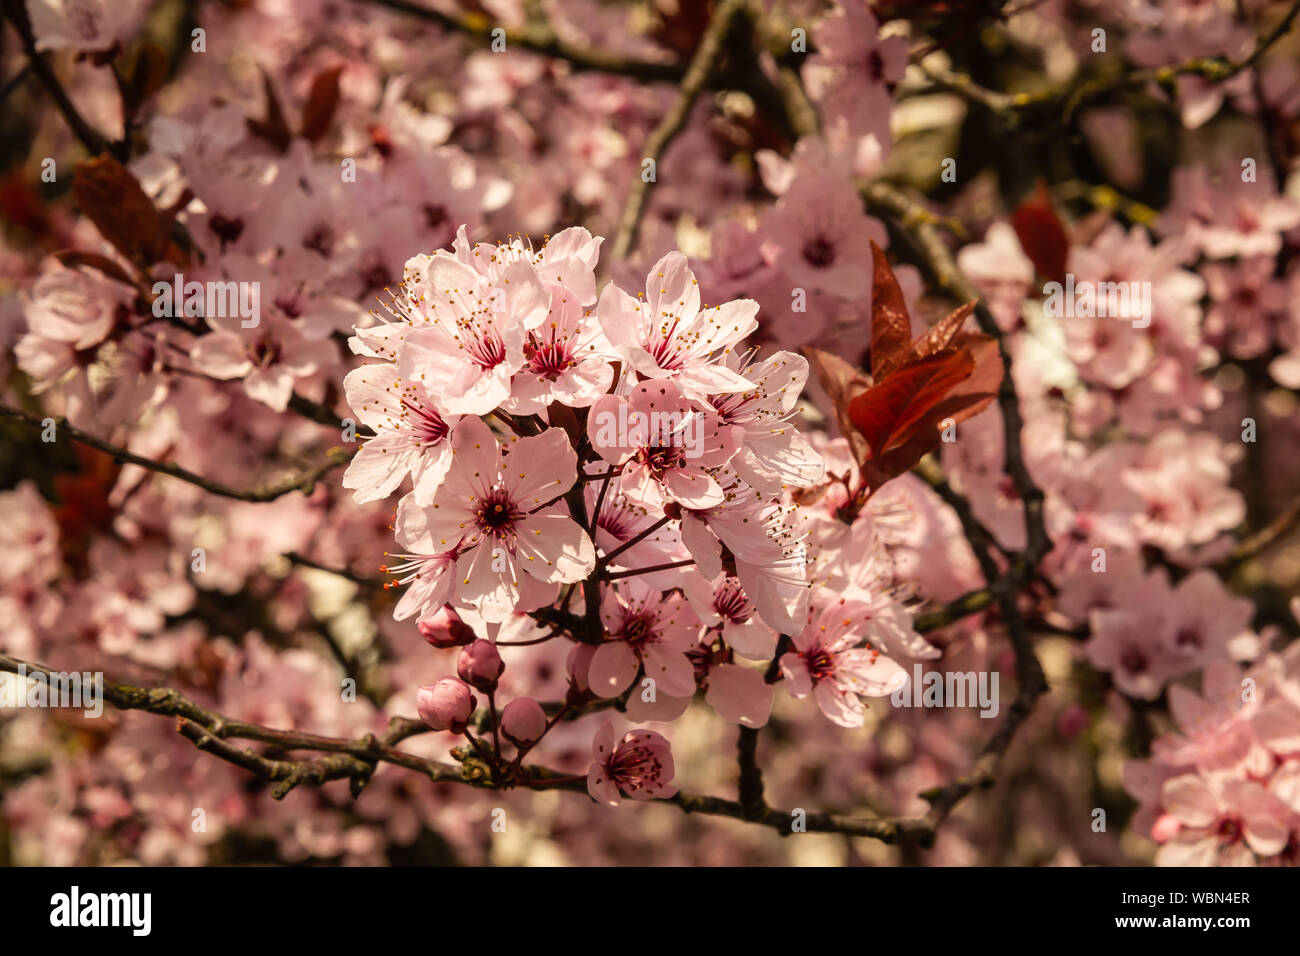 Pink Japanese cherry blossoms Stock Photo